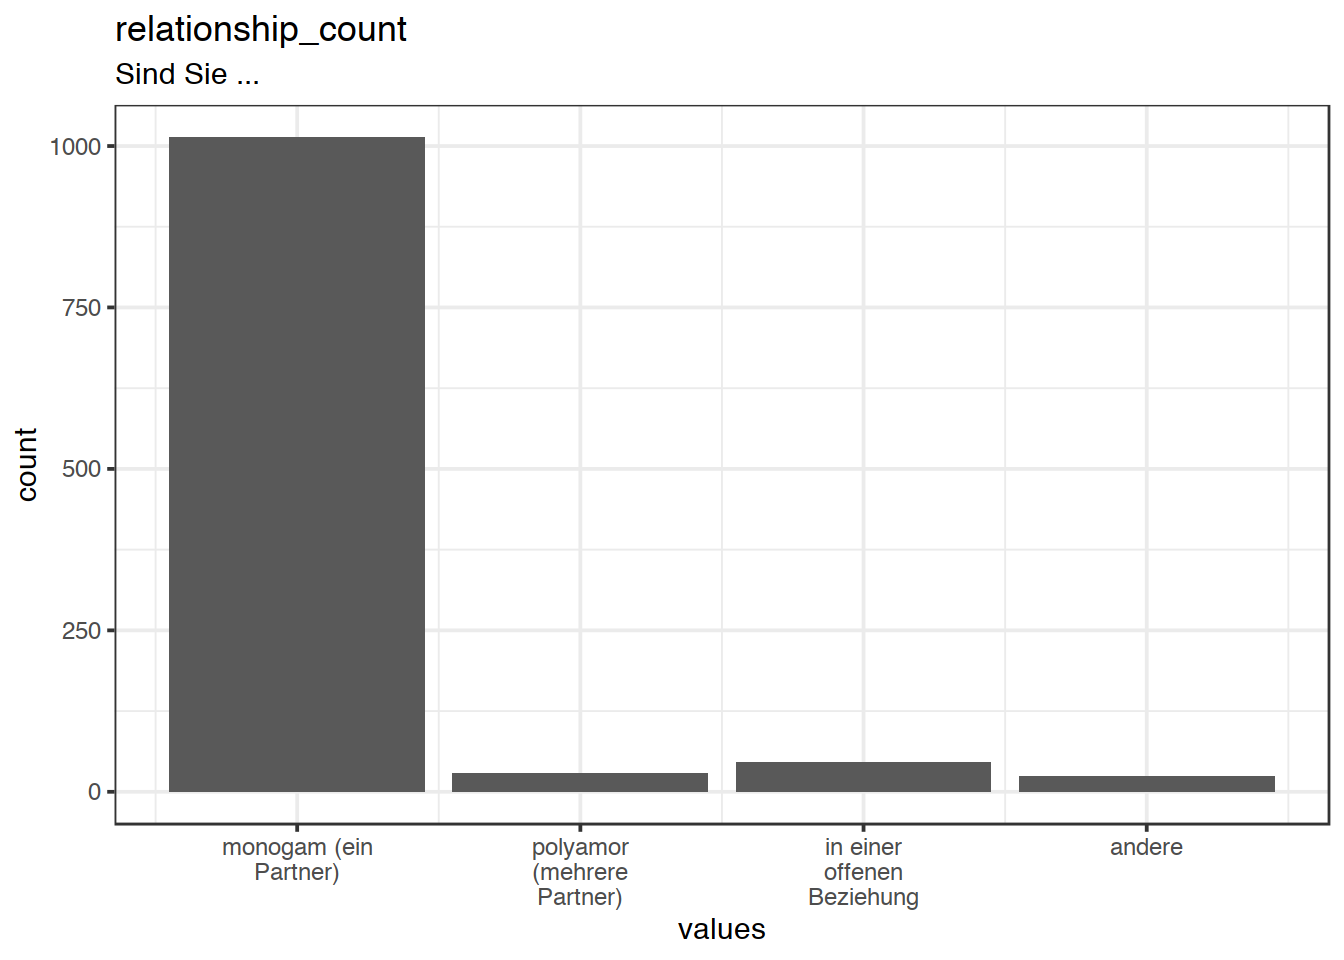 Distribution of values for relationship_count